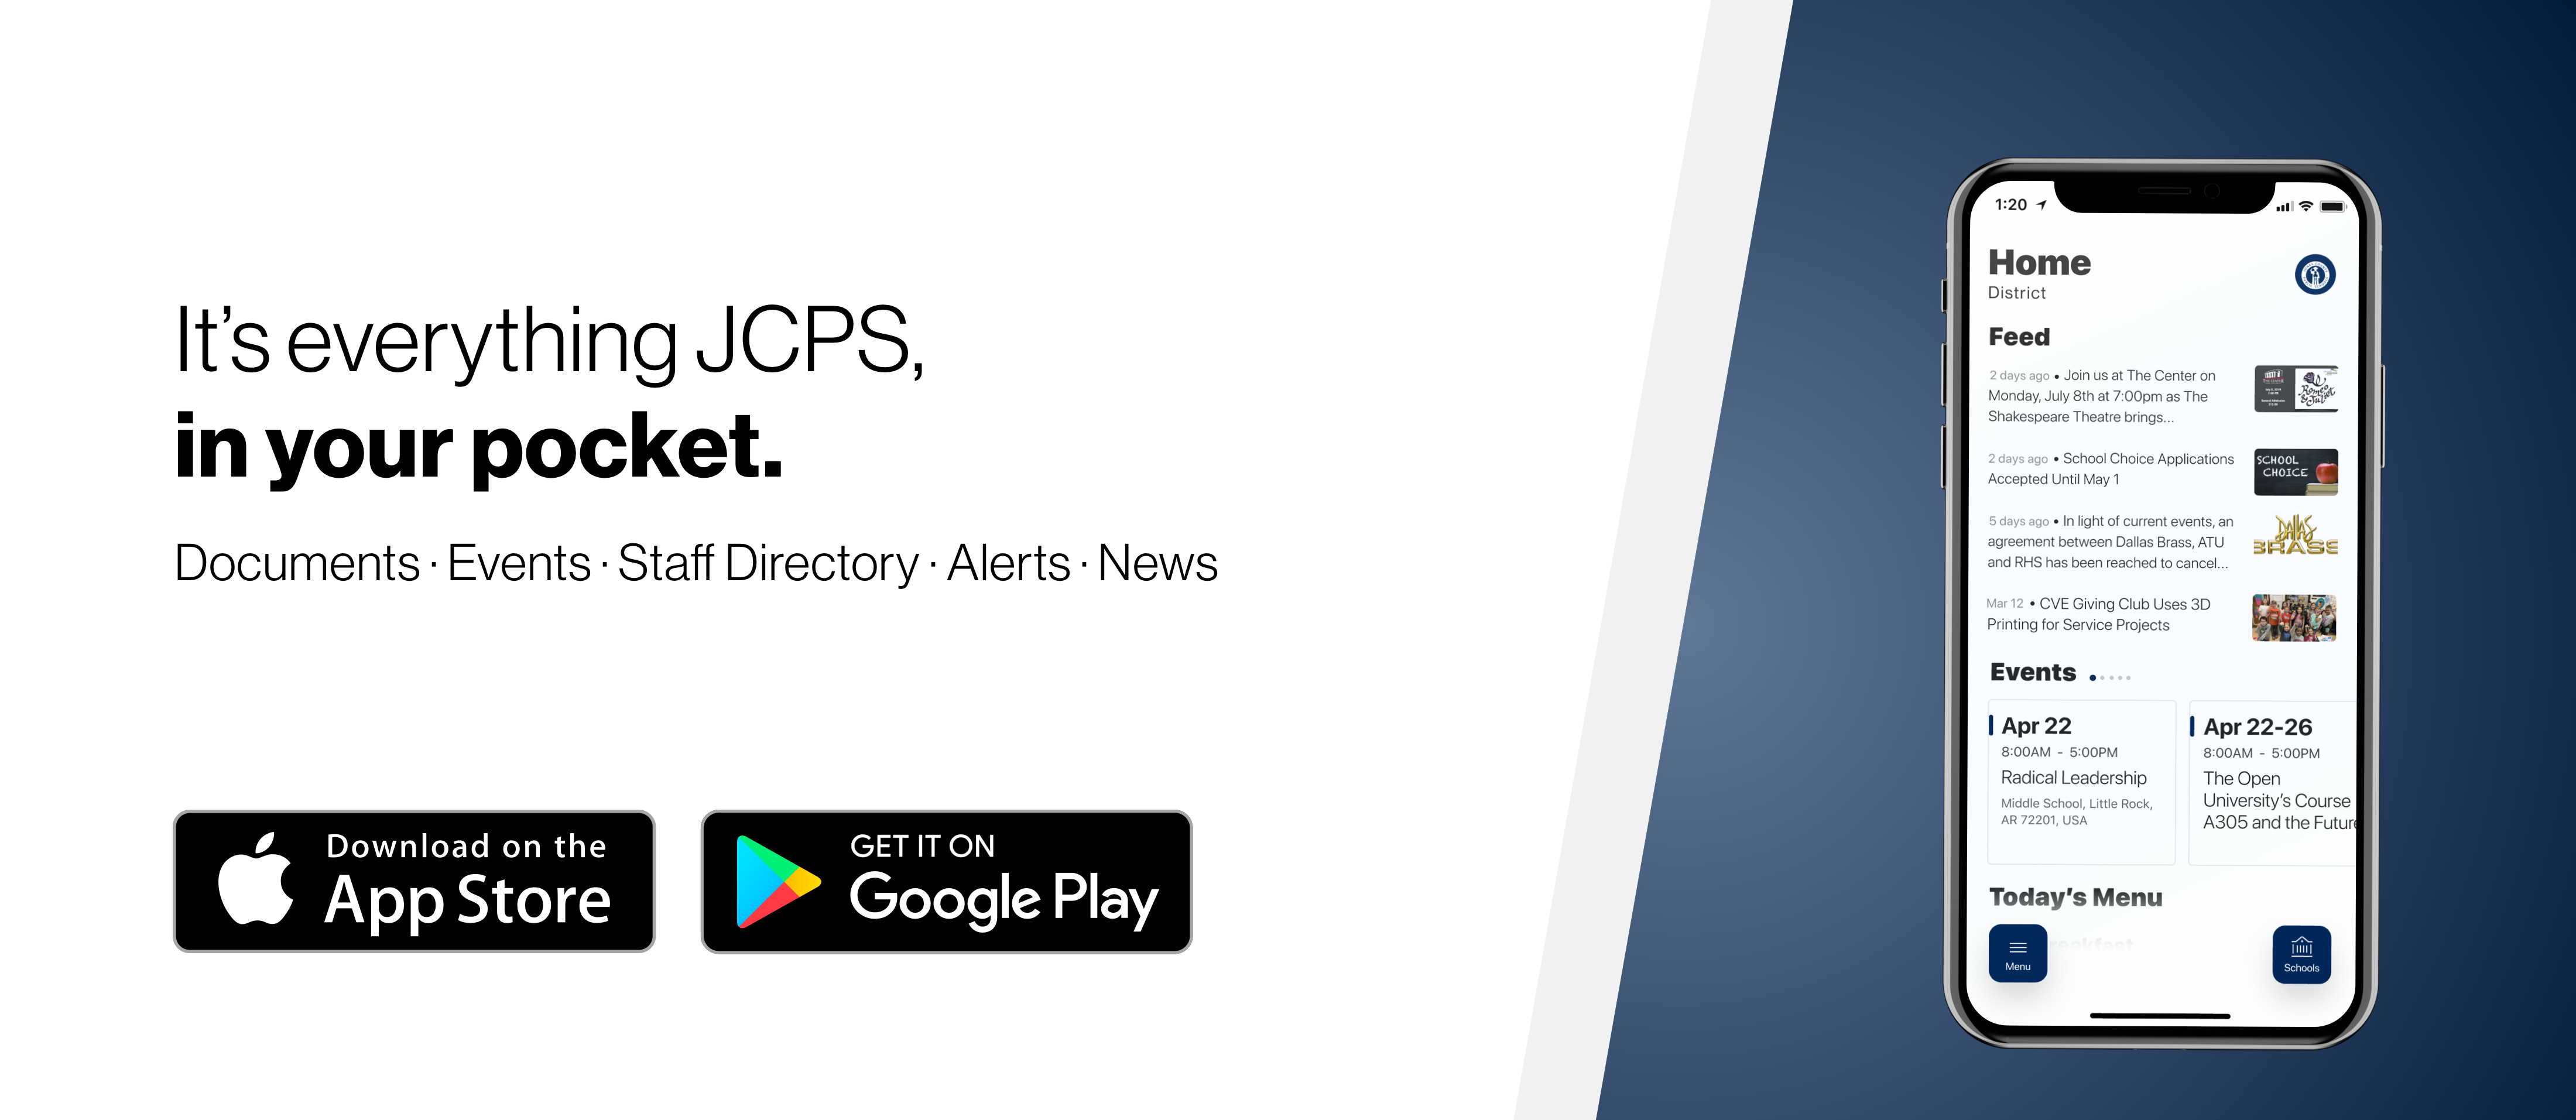 Download the JCPS App